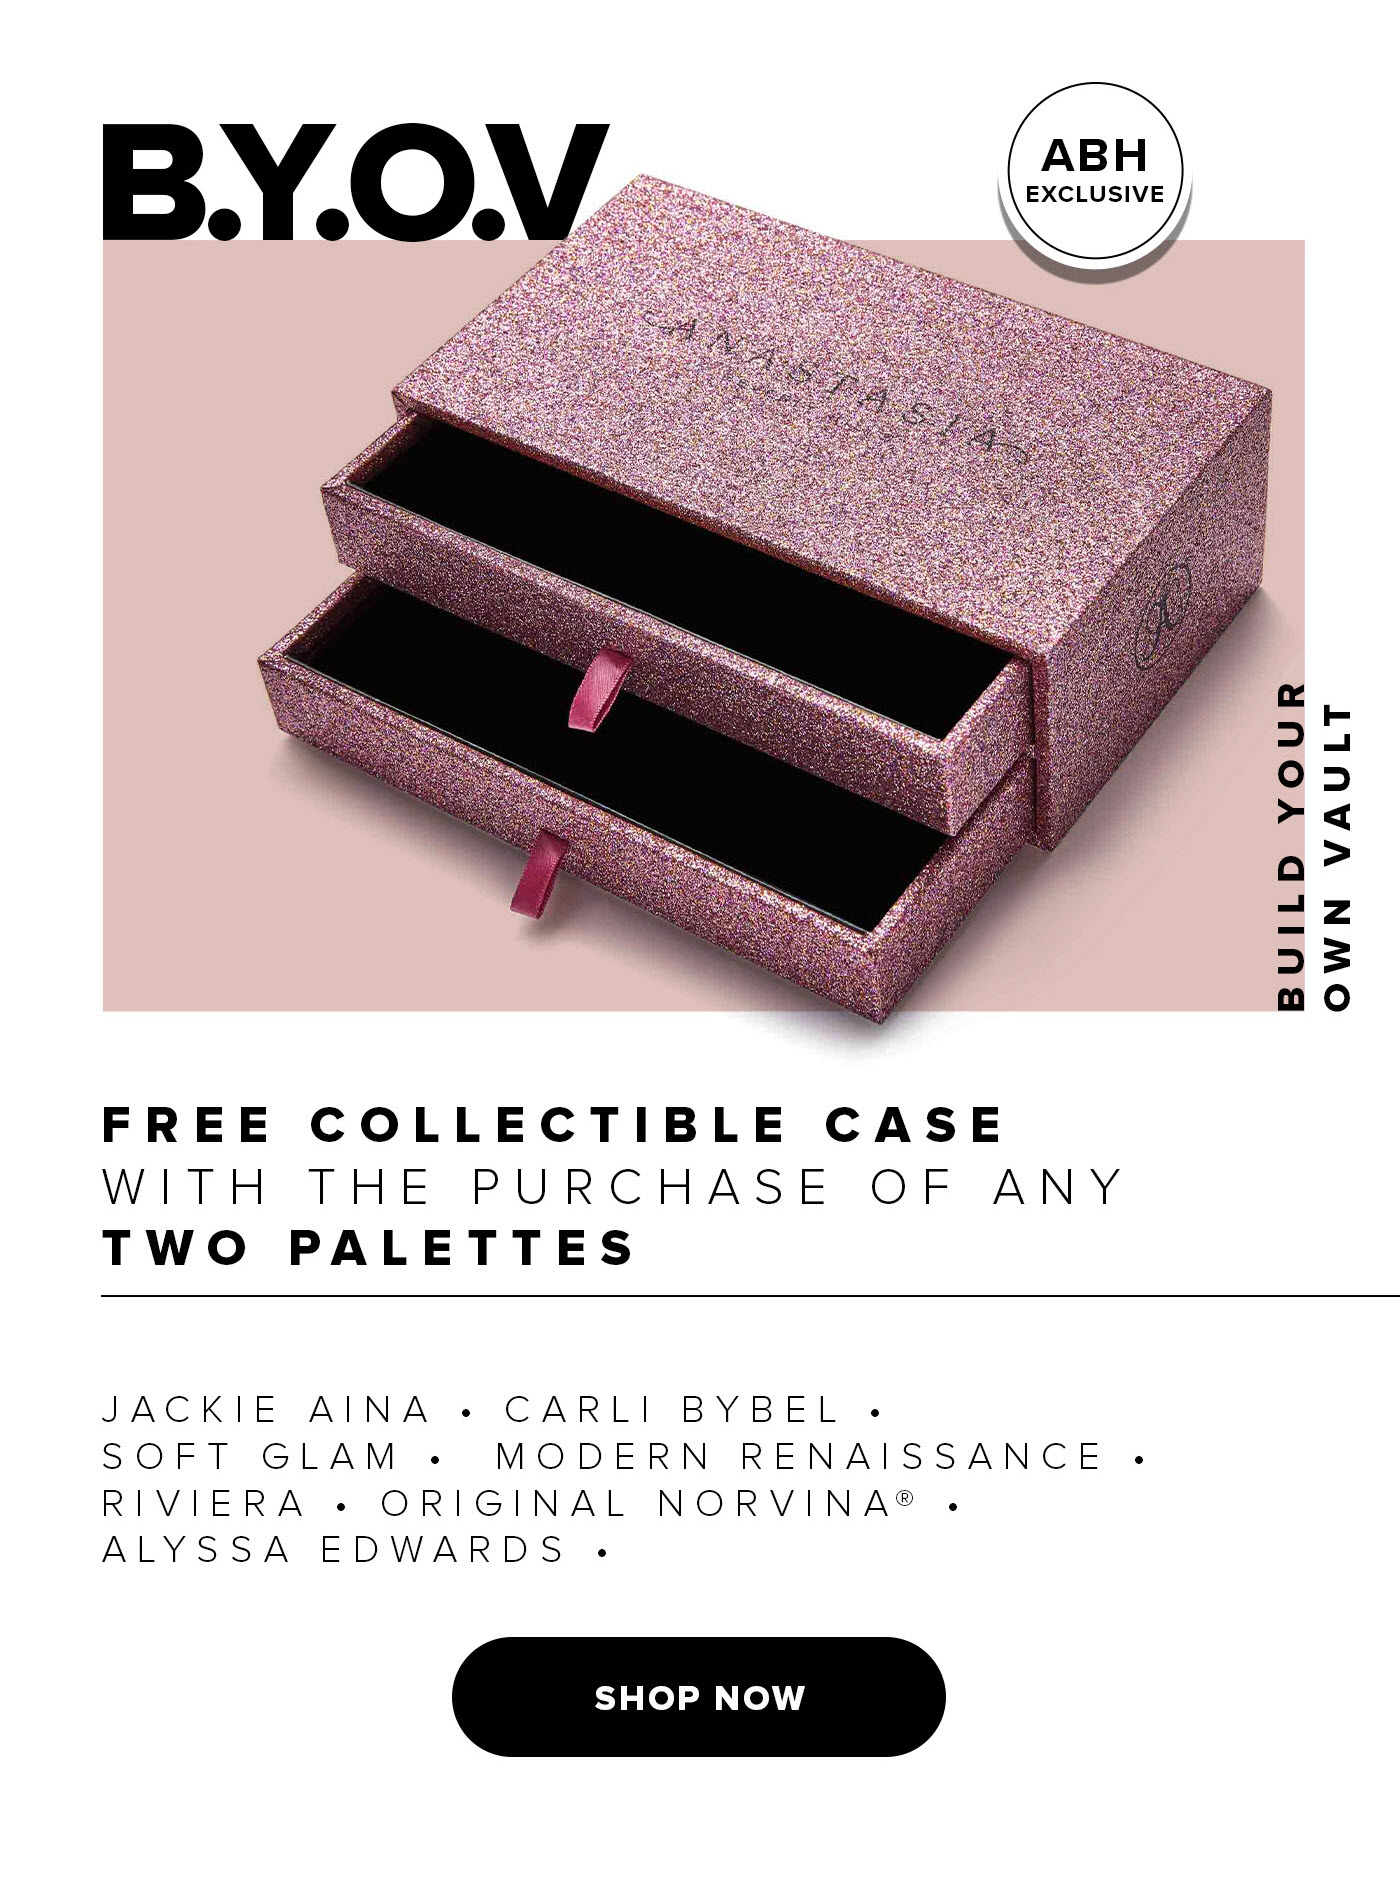 Build Your Own Vault - Free Collectible Case with the Purchase of Any Two Palettes